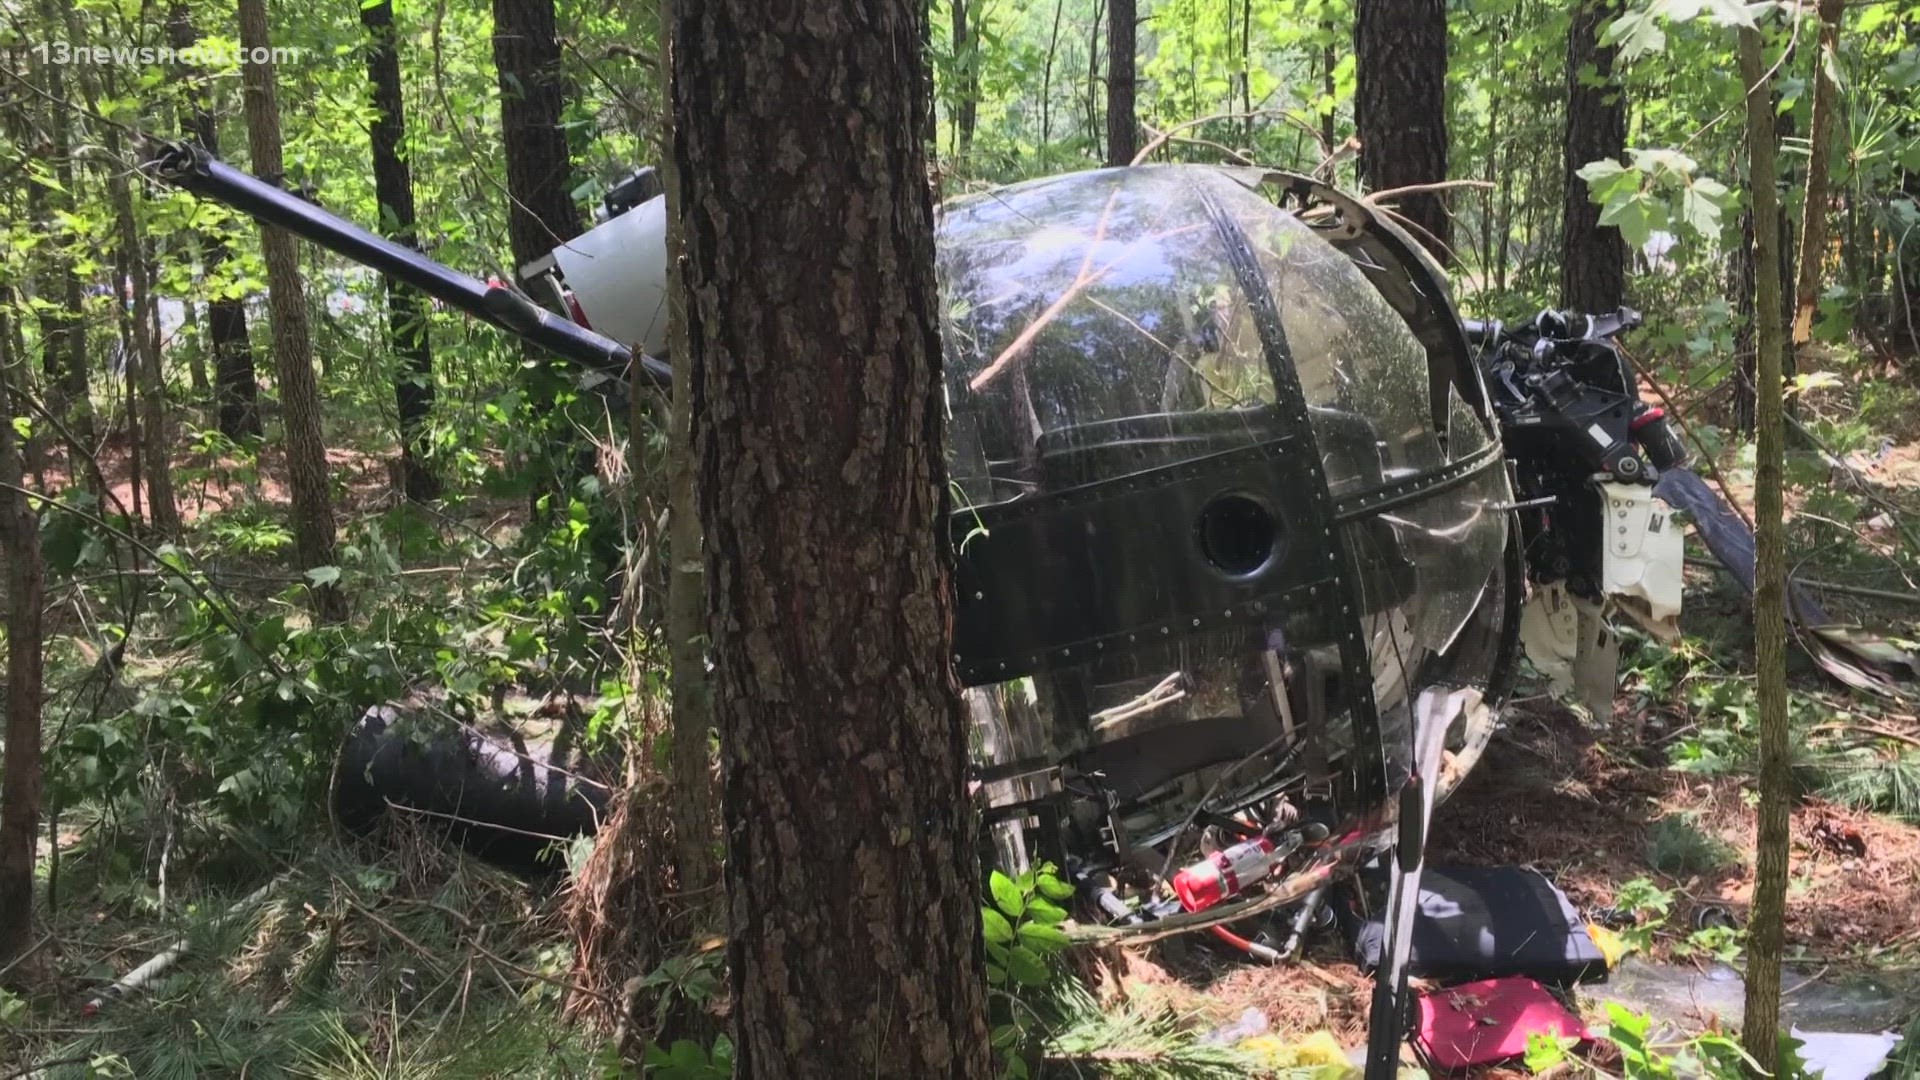 According to Virginia State Police, a private helicopter carrying two people crashed around 12:45 p.m. on Saturday.